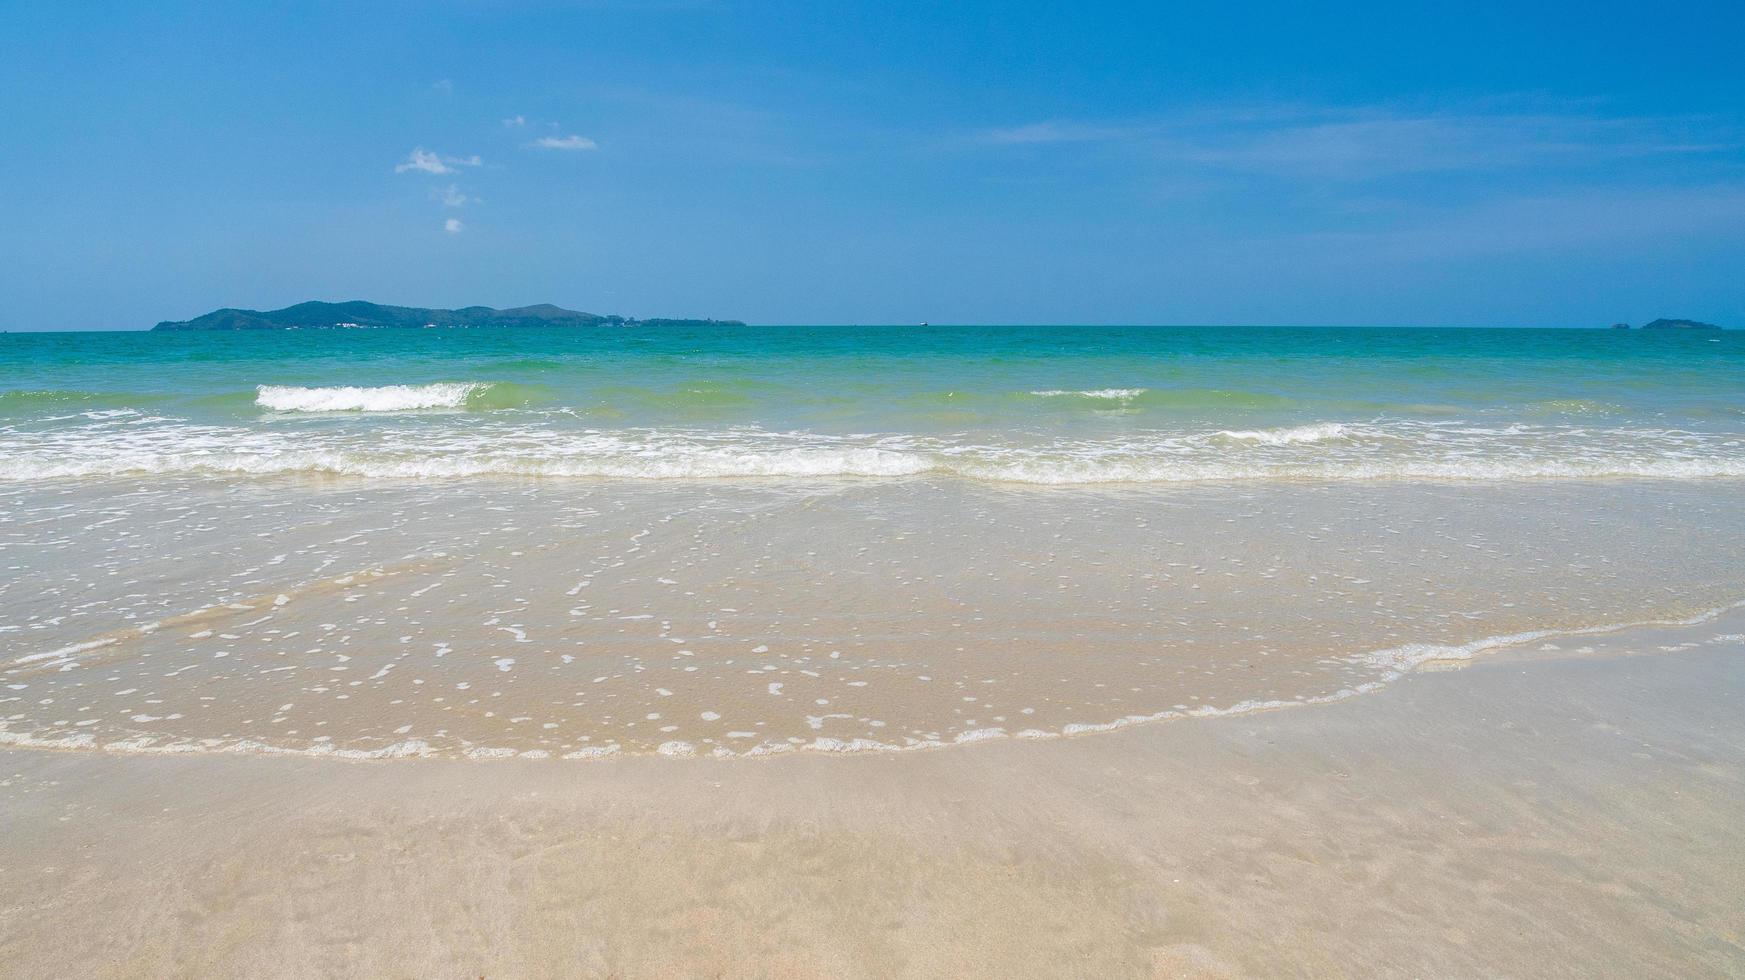 view summer landscape Suan Son Beach has Clean white sand beach Stretching along coast Gulf Thailand East country And  clear skies, suitable for relaxation, vacation in Thailand Rayong photo